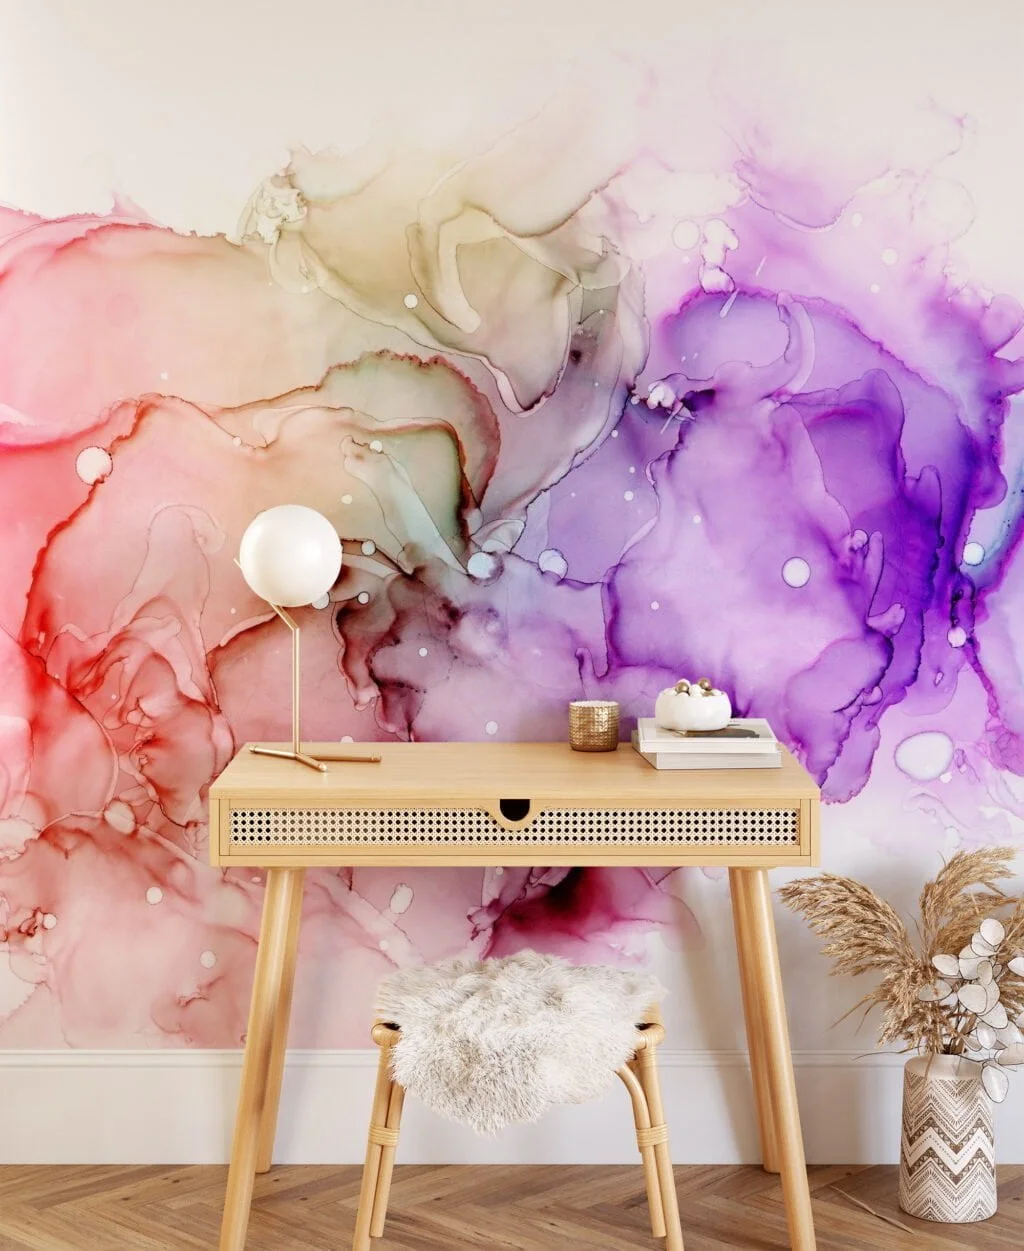 Abstract Multicolored Ink Splash Wallpaper - High-Quality Peel & Stick Self-Adhesive Mural